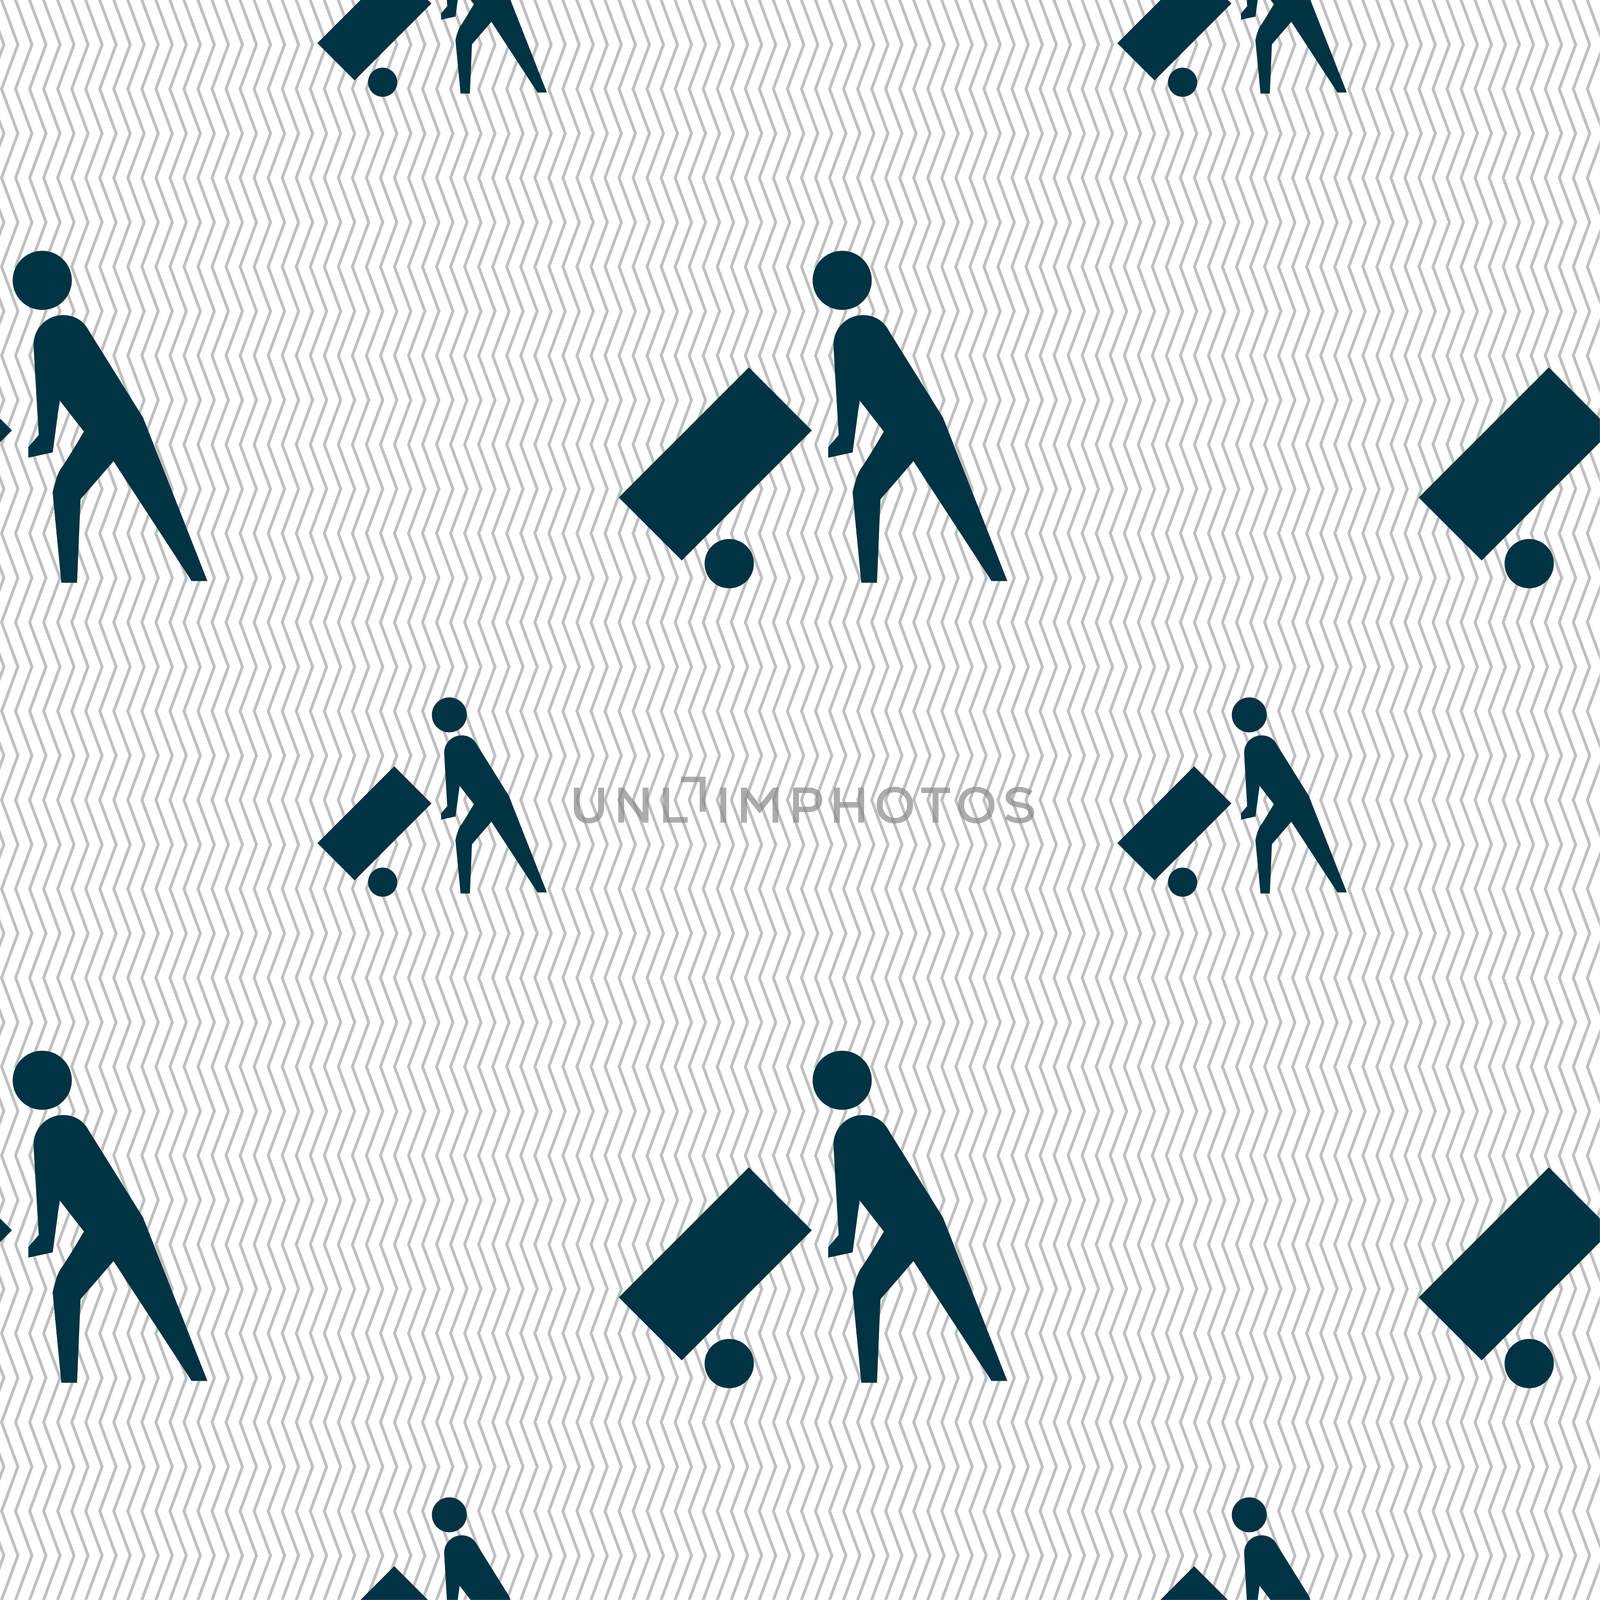 Loader icon sign. Seamless pattern with geometric texture. illustration